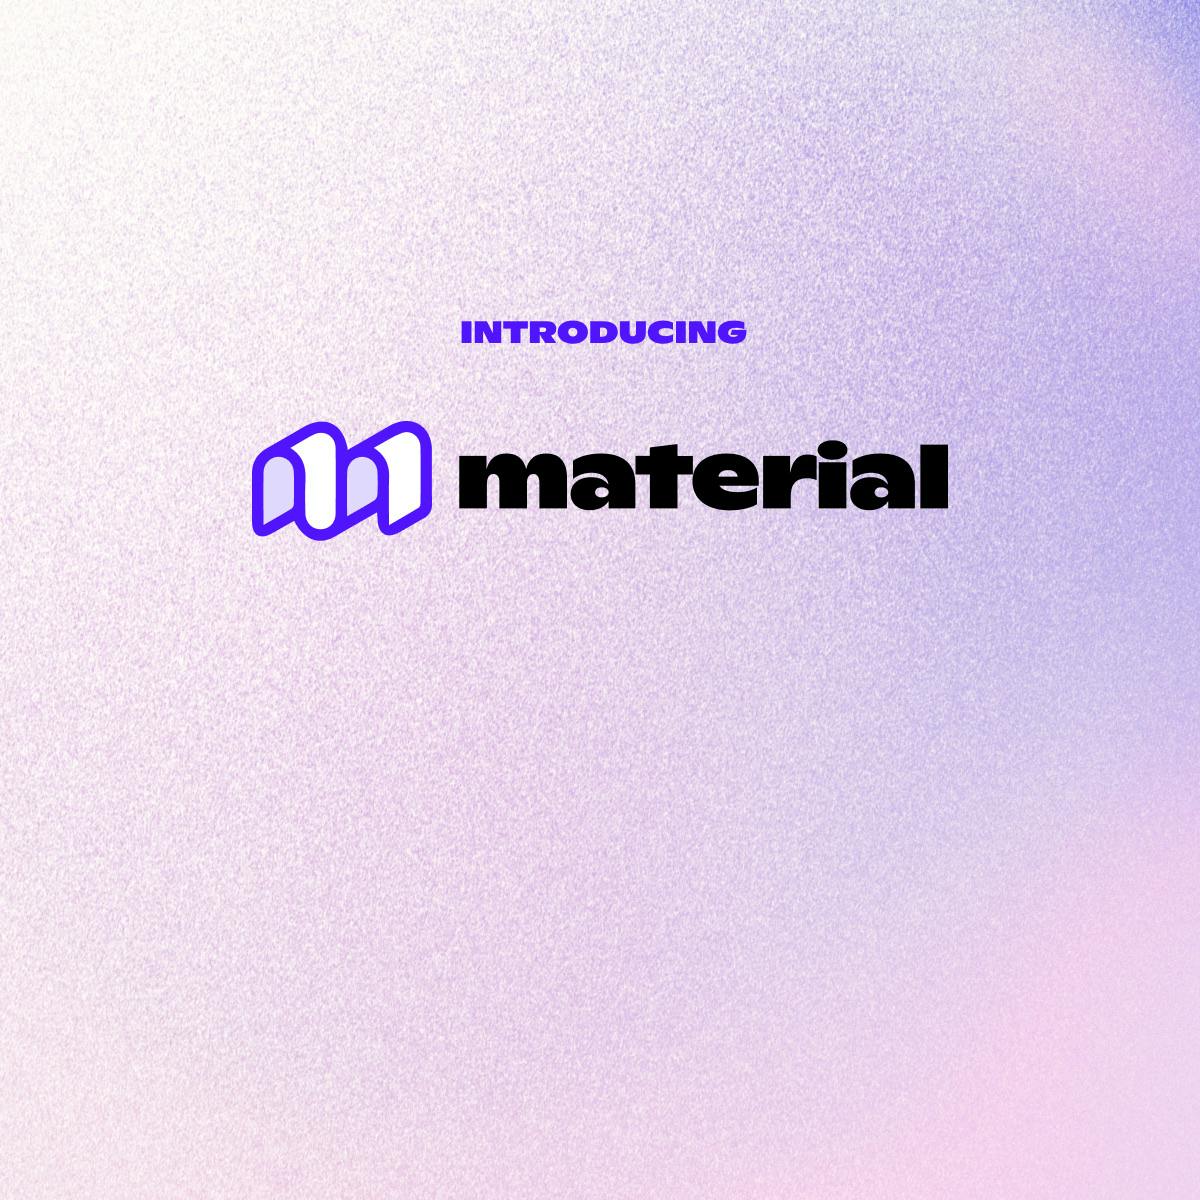 Cover Image for Shoptiques Business Has a New Name: Introducing Material